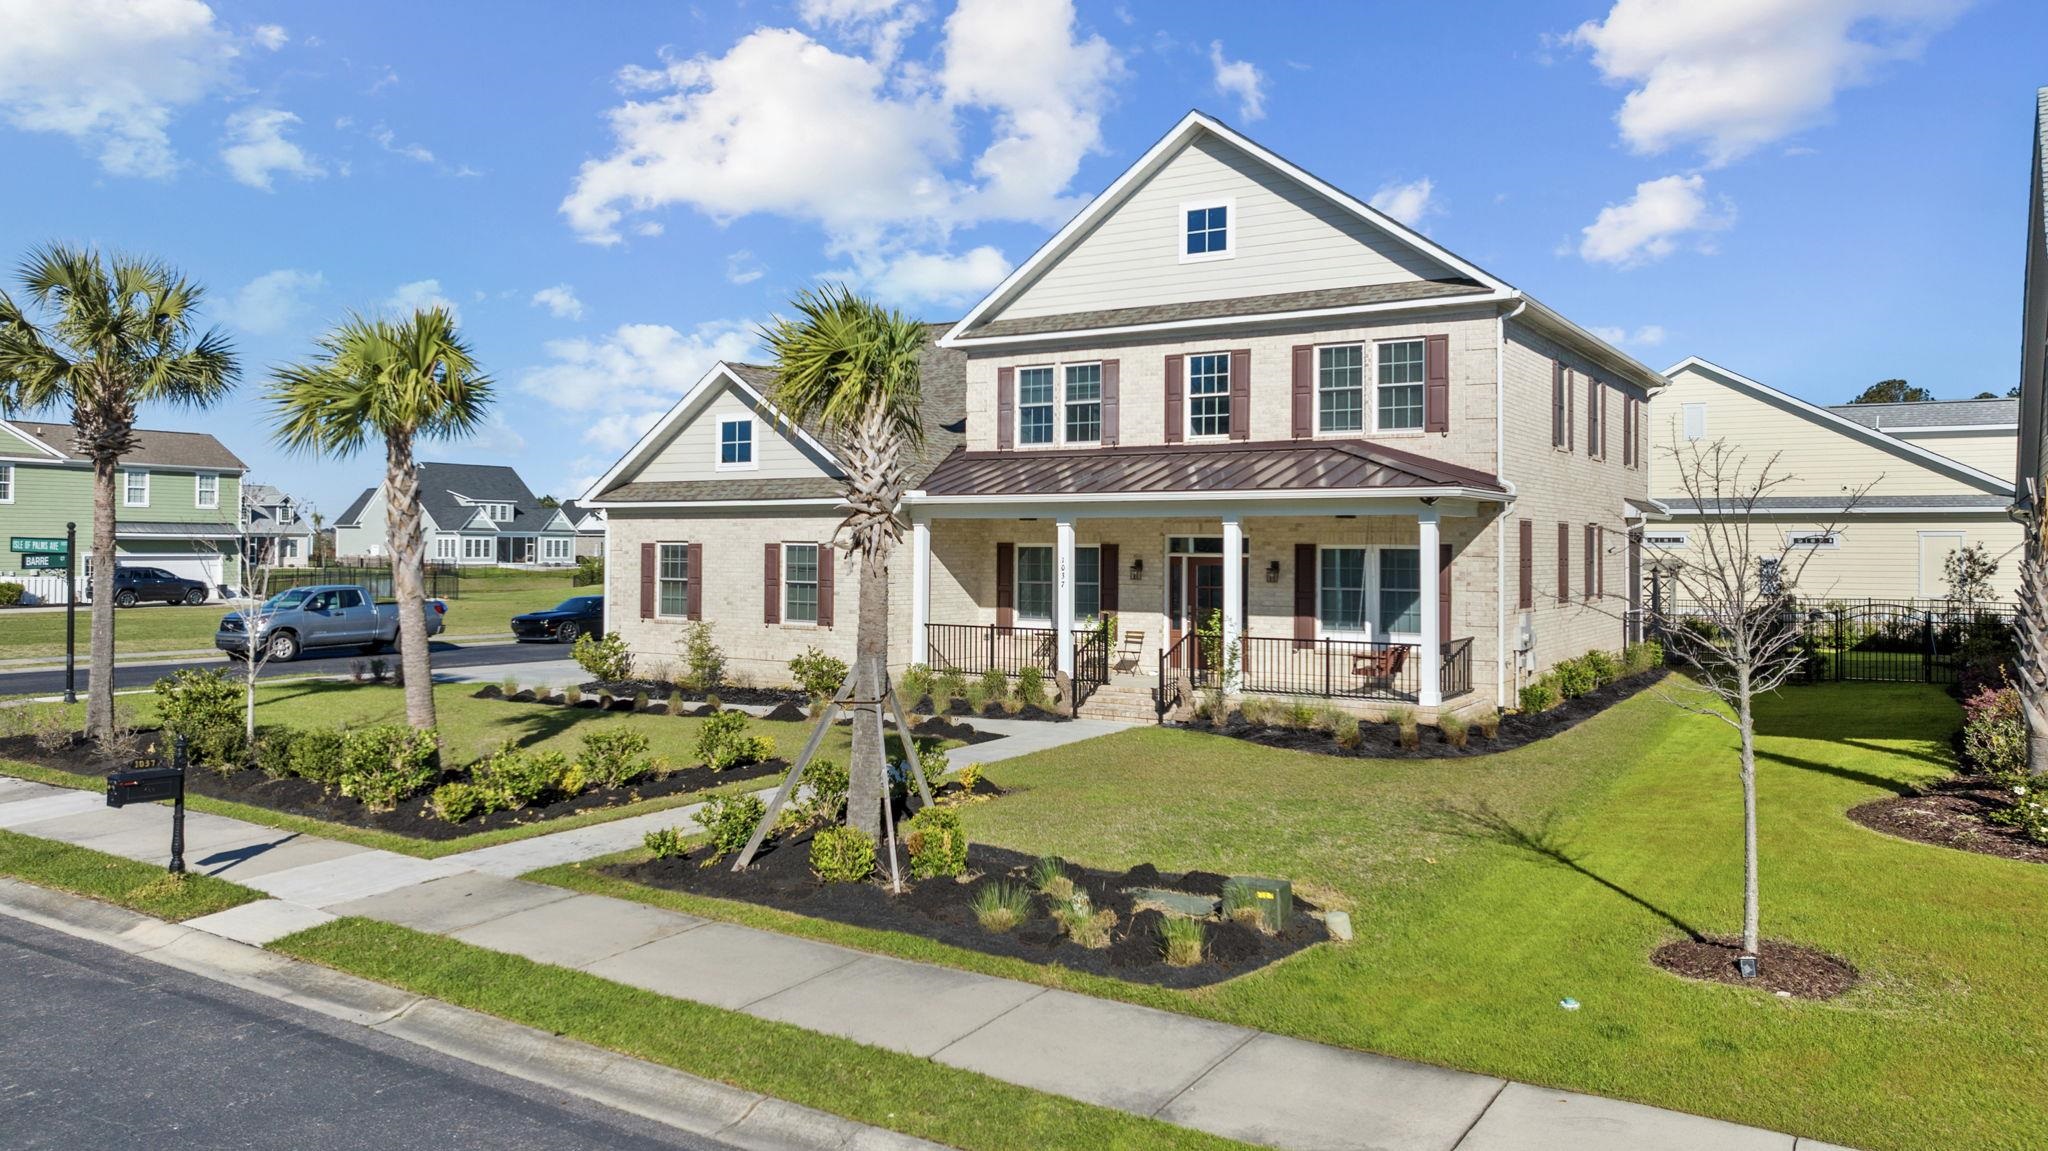 1037 East Isle of Palms Ave. Myrtle Beach, SC 29579